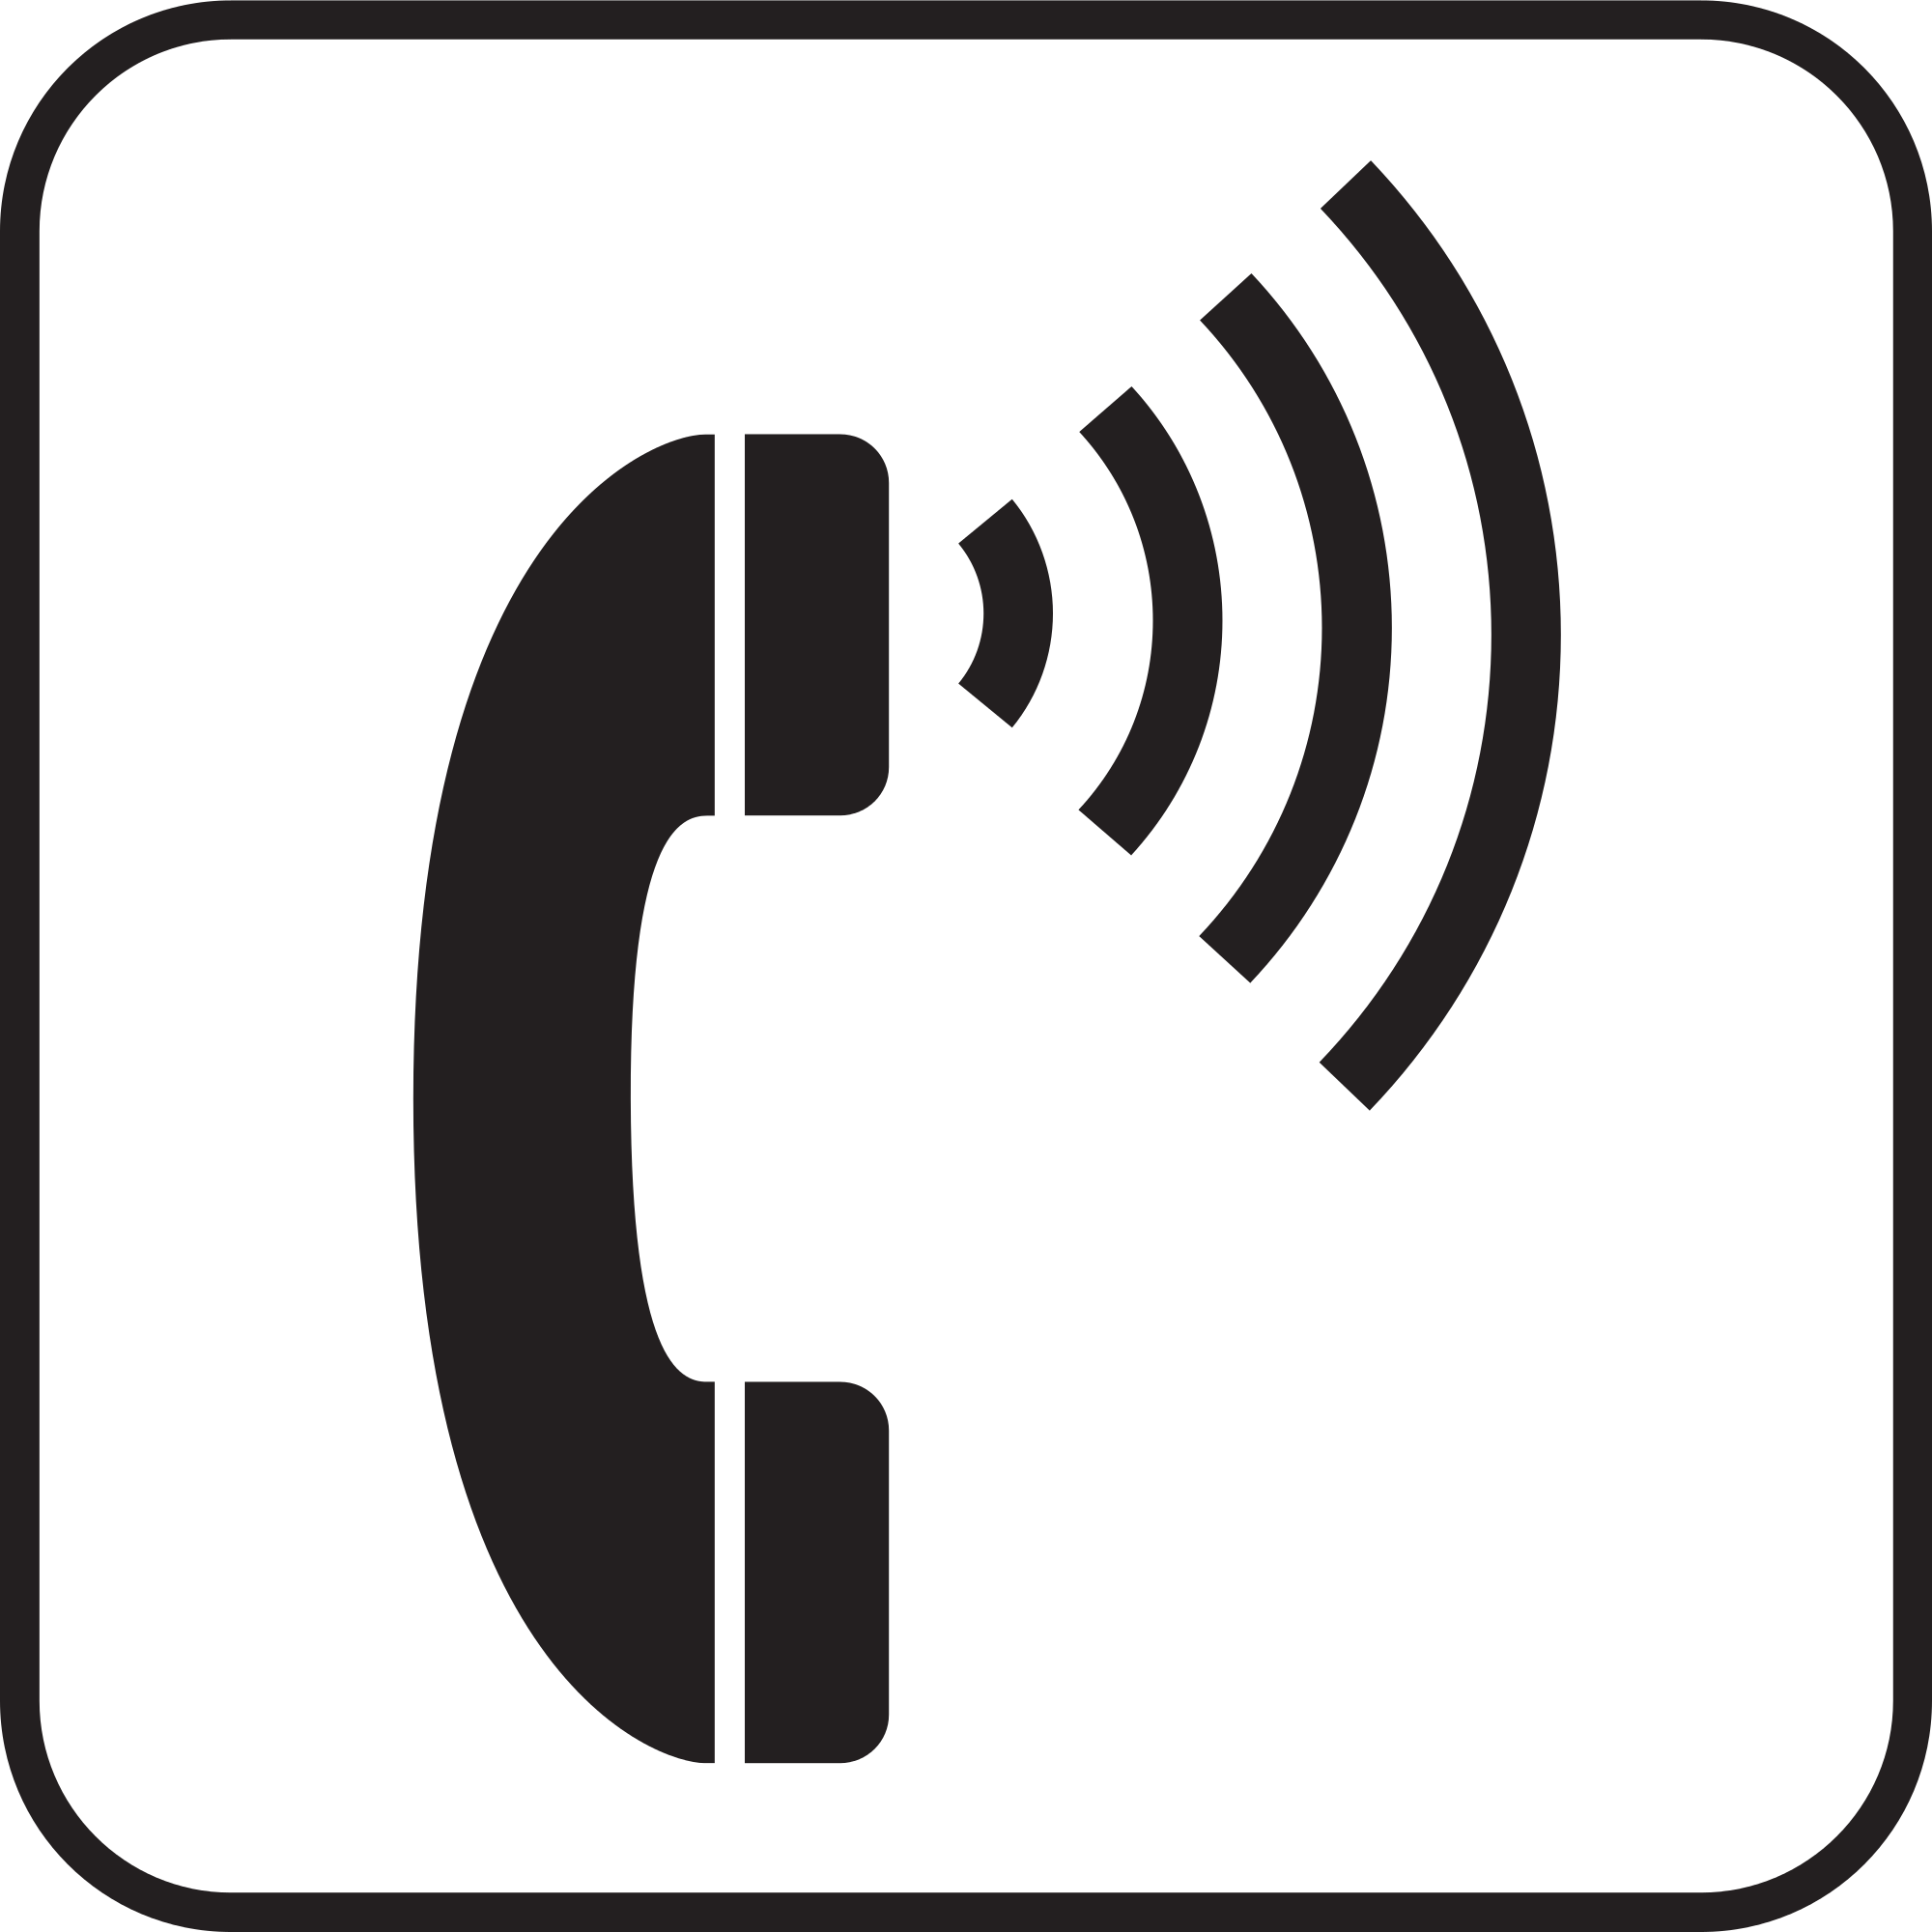 File:Pictograms-nps-accessibility-volume control telephone.svg ...